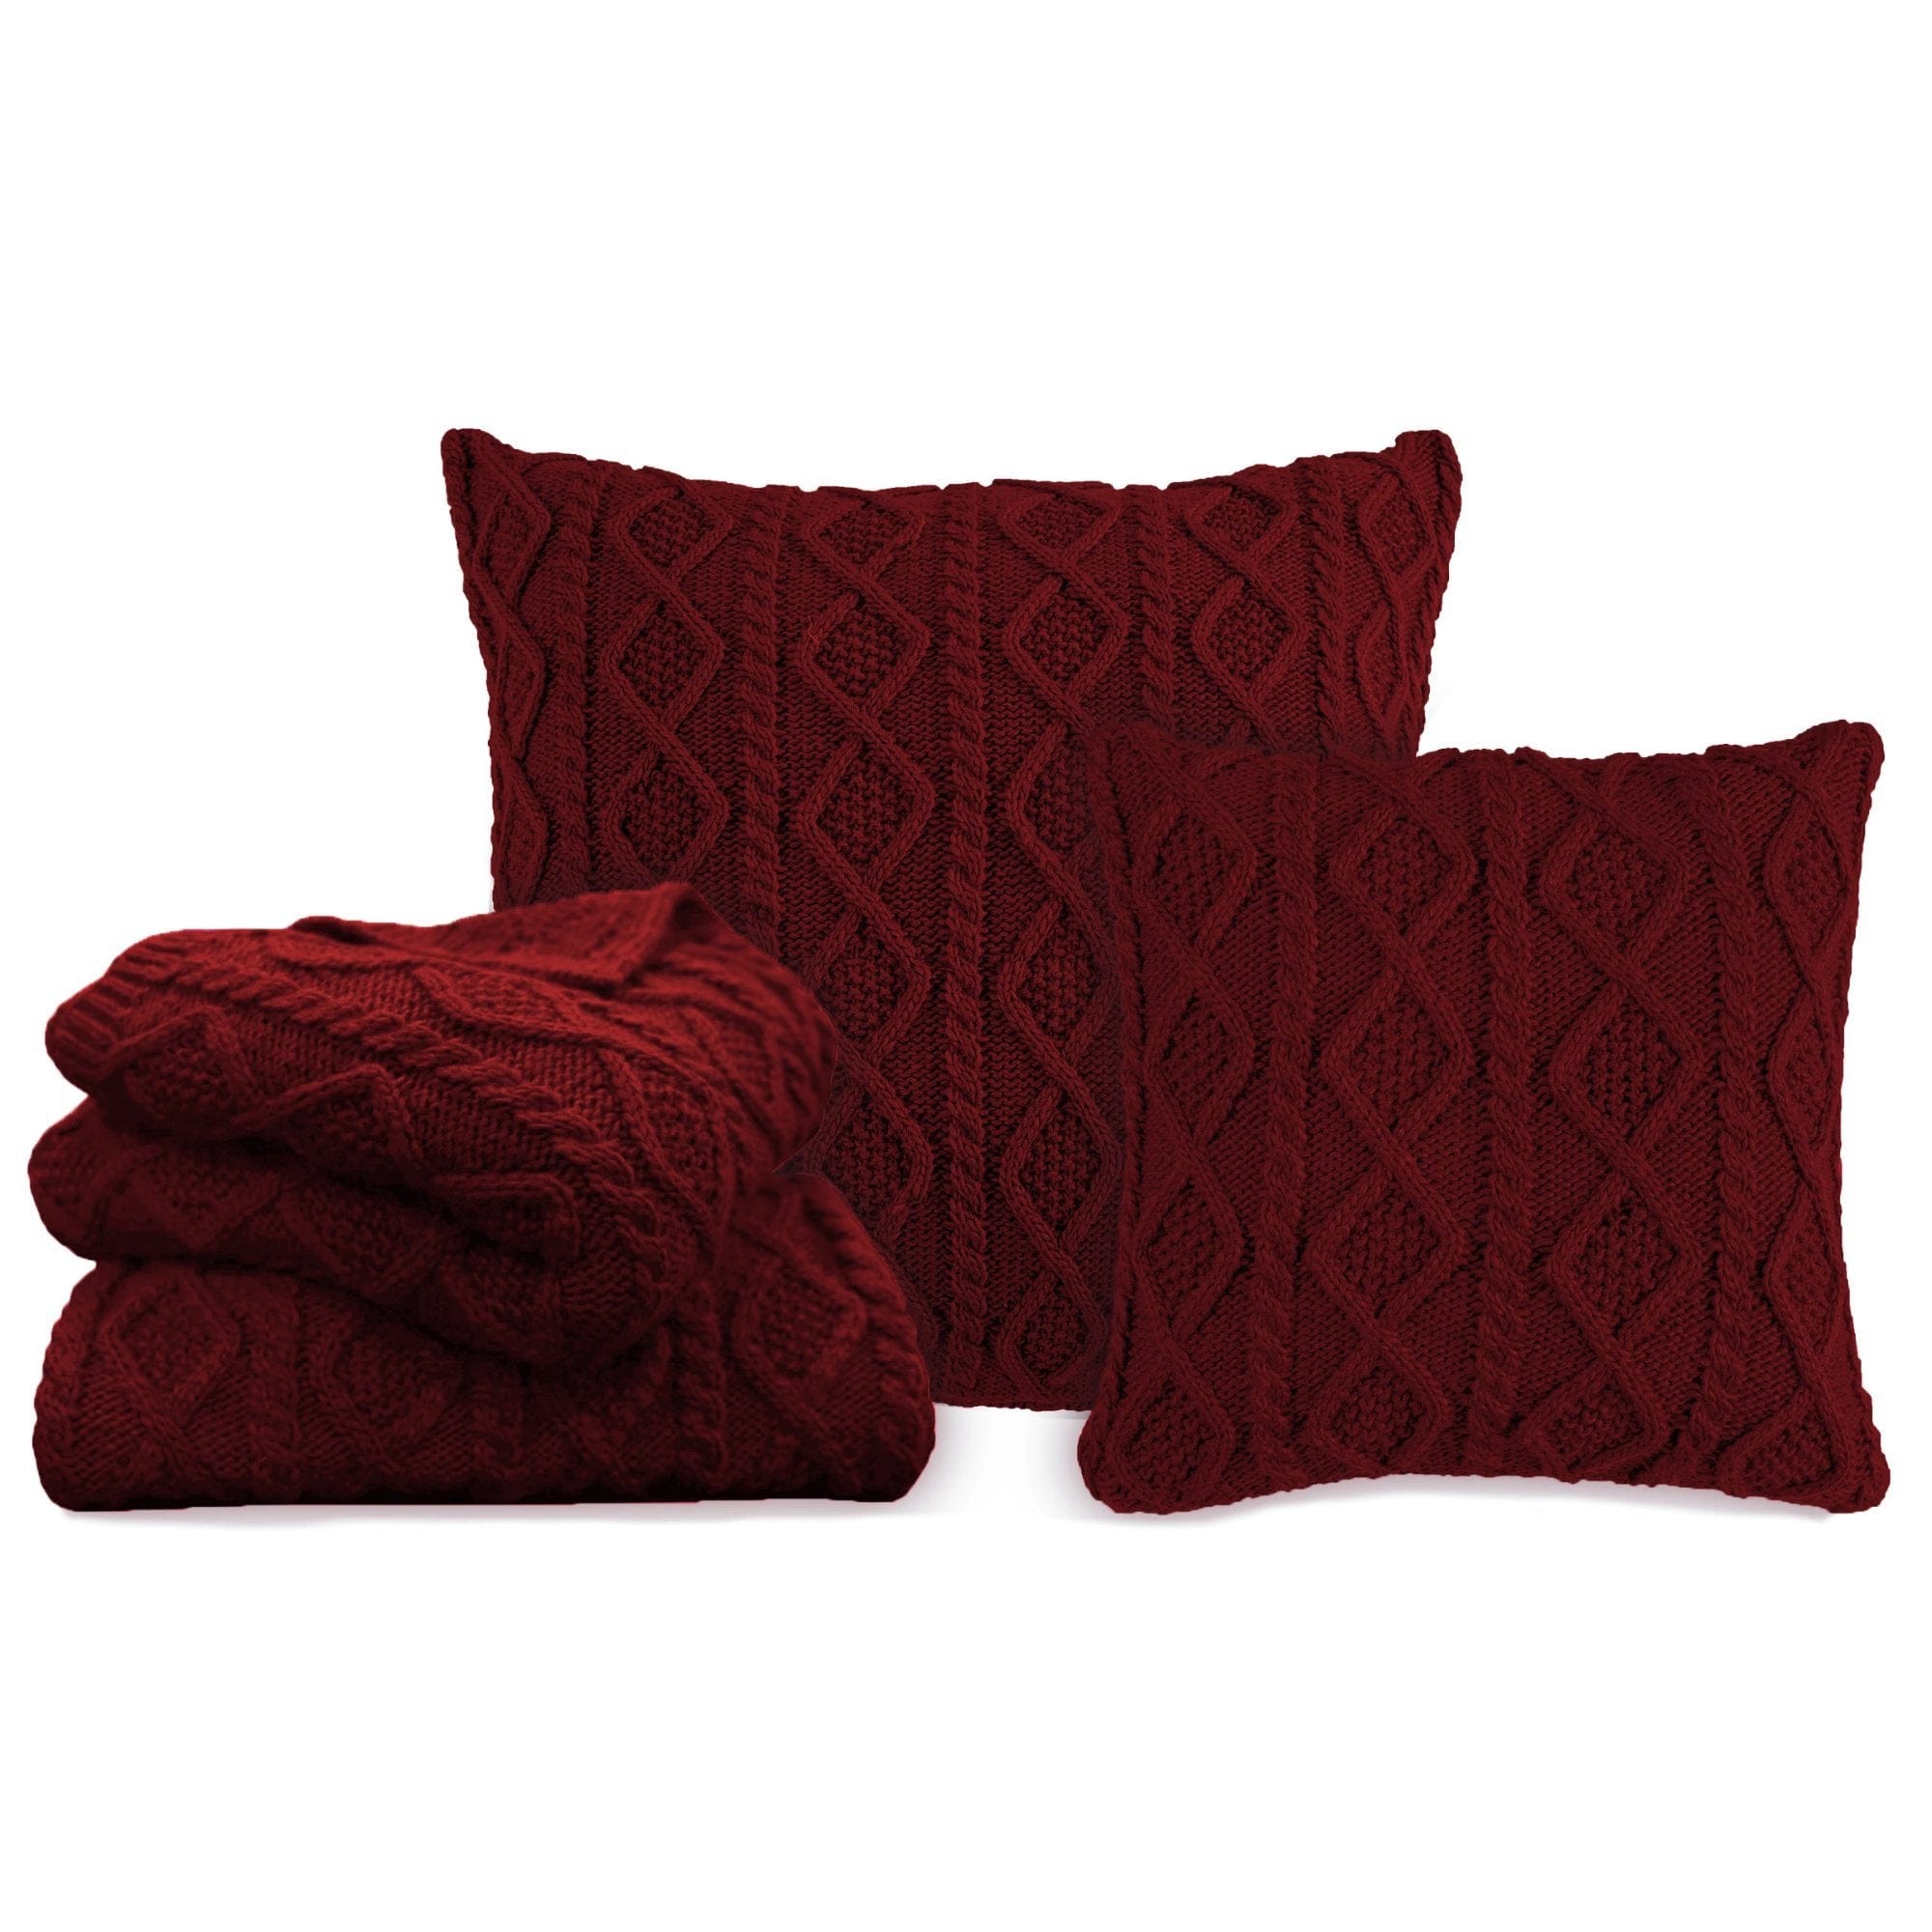 Cable Knit Soft Diamond Throw Pillow, 3 Colors, 18x18 Pillow